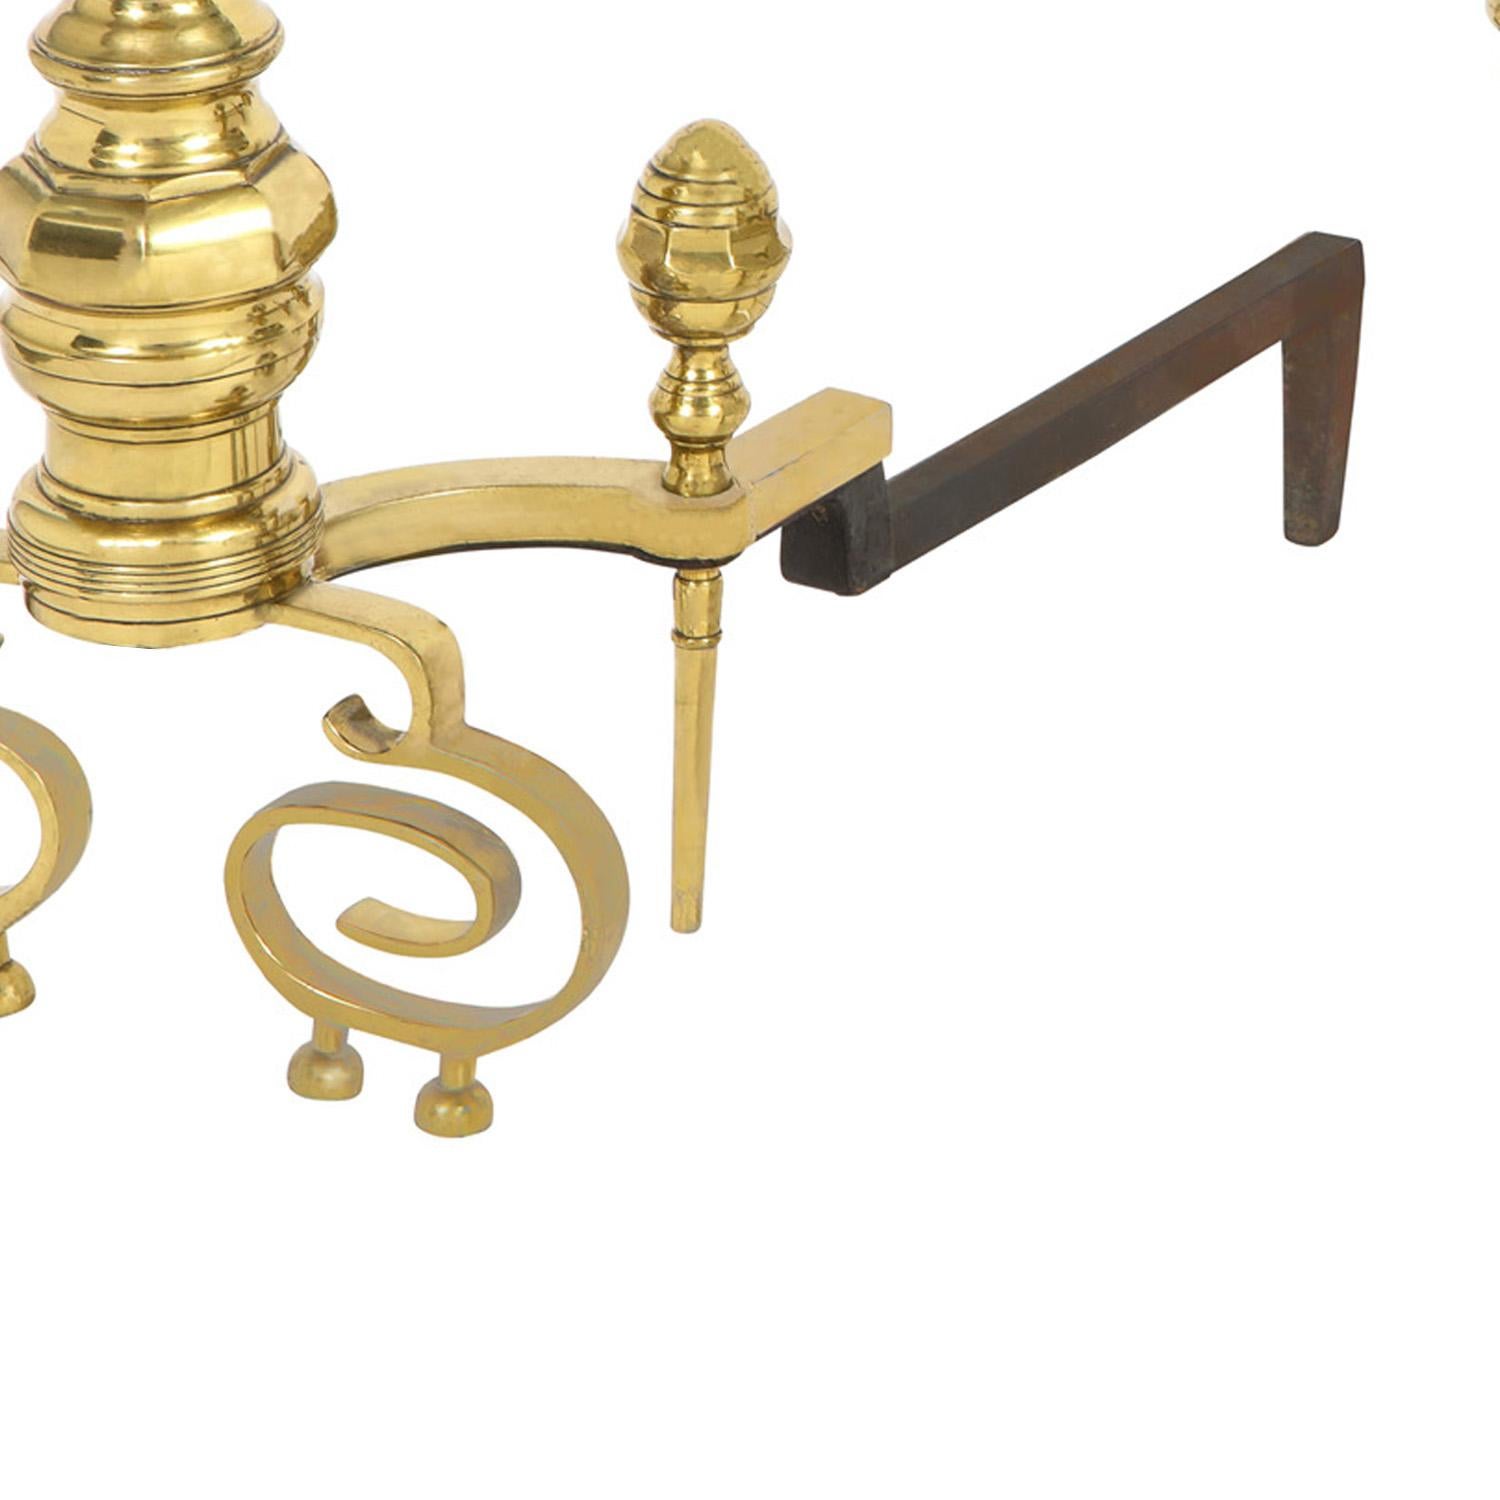 Hand-Crafted Pair of Artisan Andirons in Polished Brass and Wrought-Iron 1970s For Sale